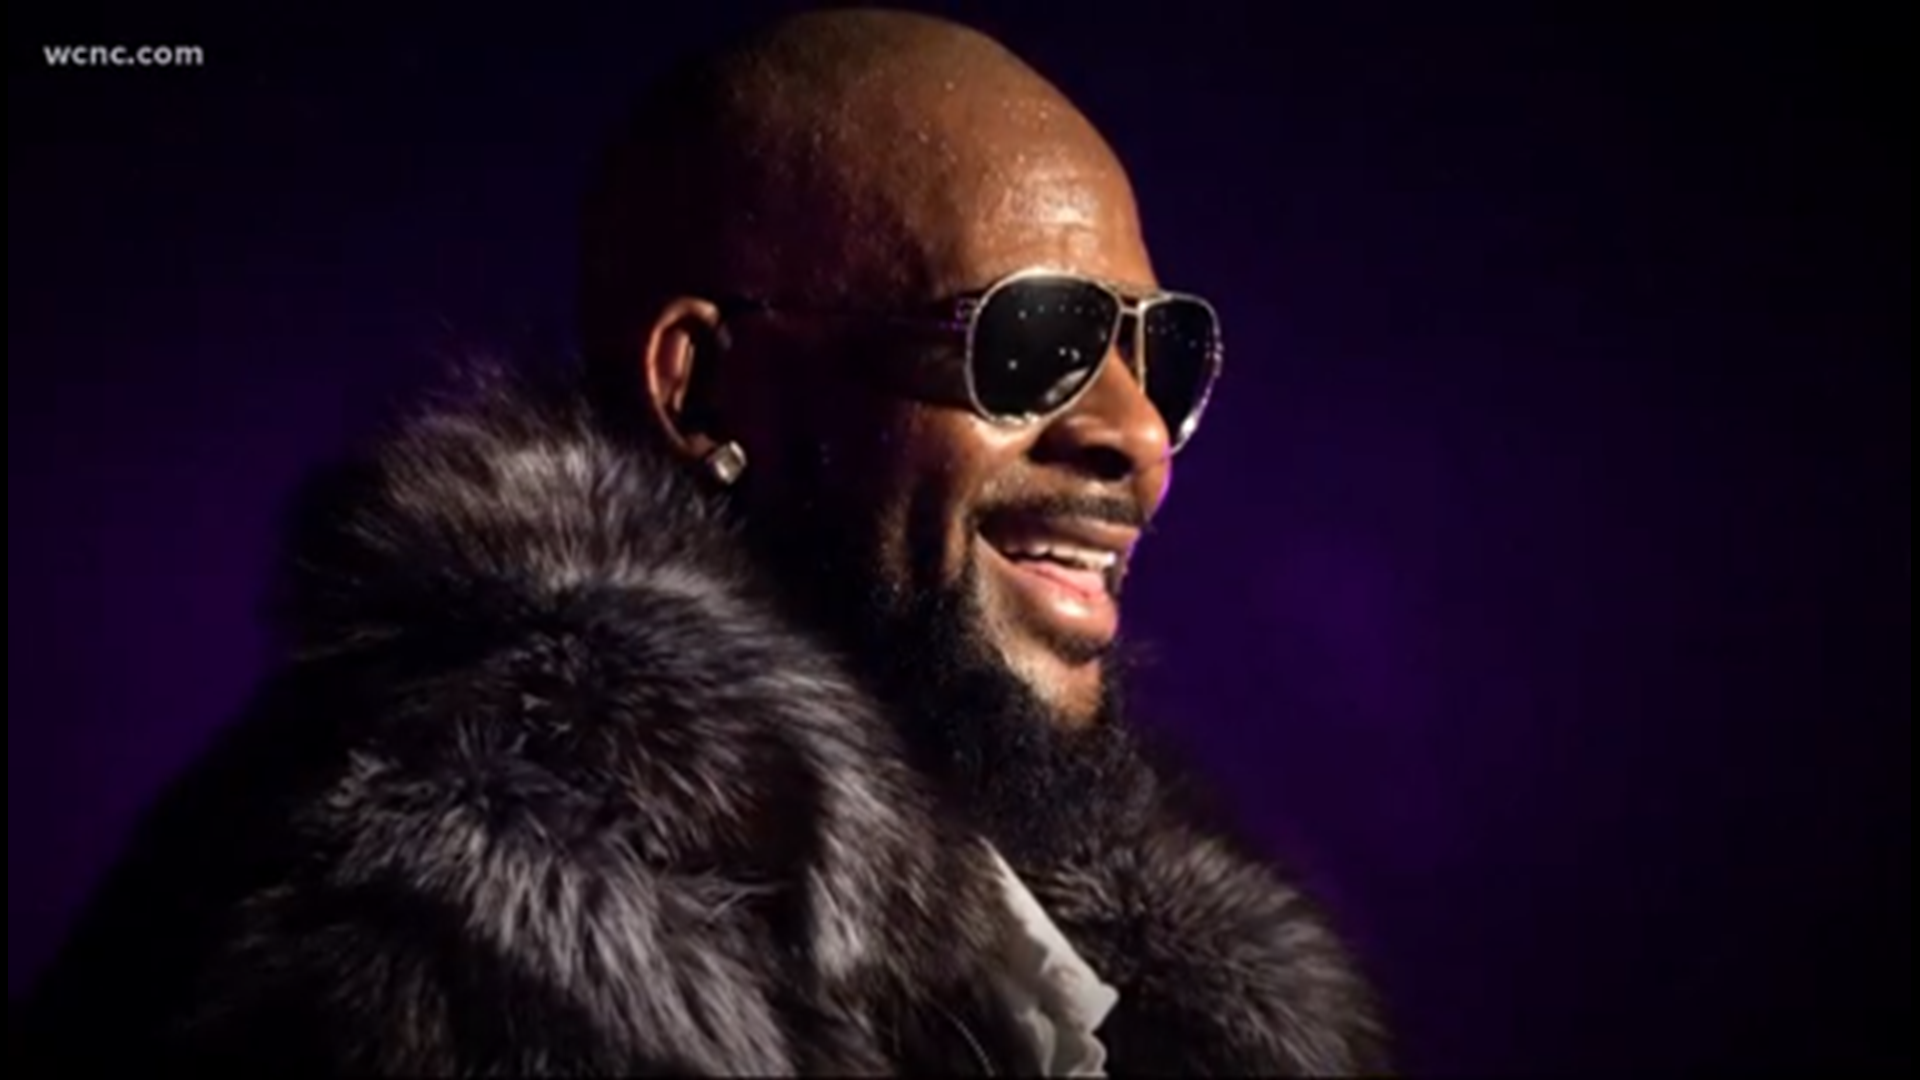 The episode comes on the heels of a lifetime docu-series called "Surviving R. Kelly" that details allegations of sexual misconduct against the singer.